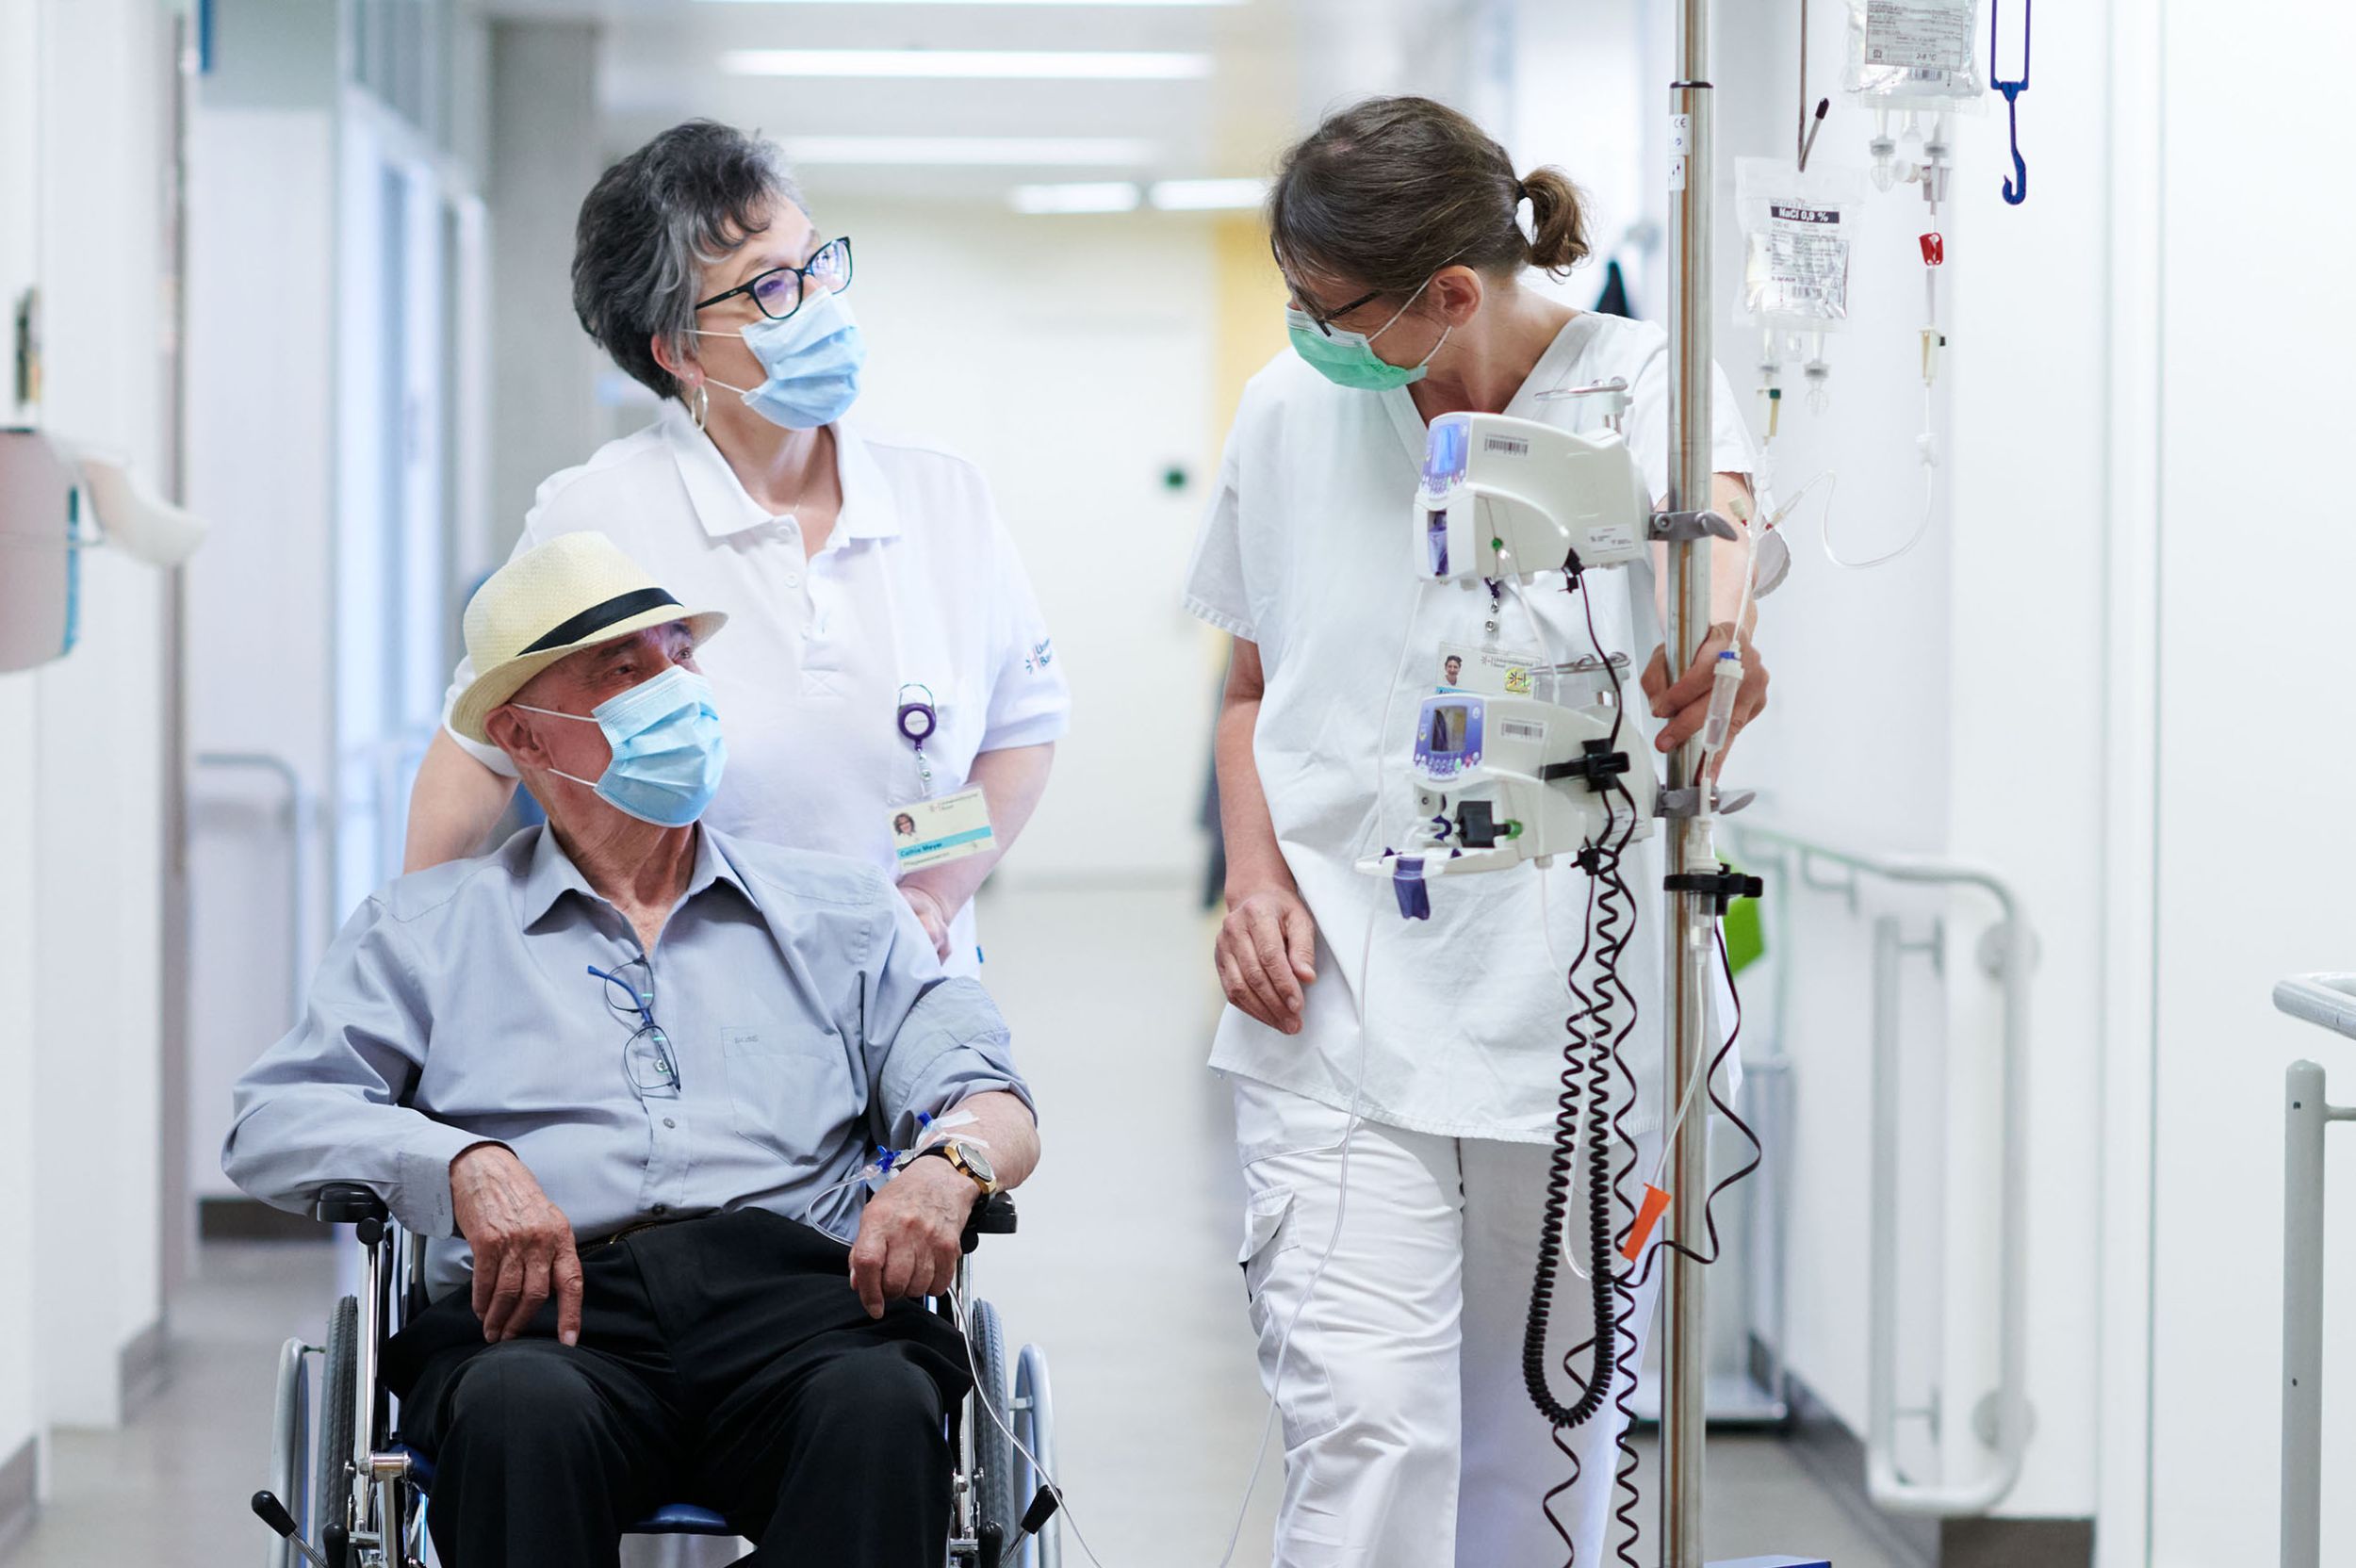 A nurse accompanies a patient in a wheelchair through the corridor together with a relative